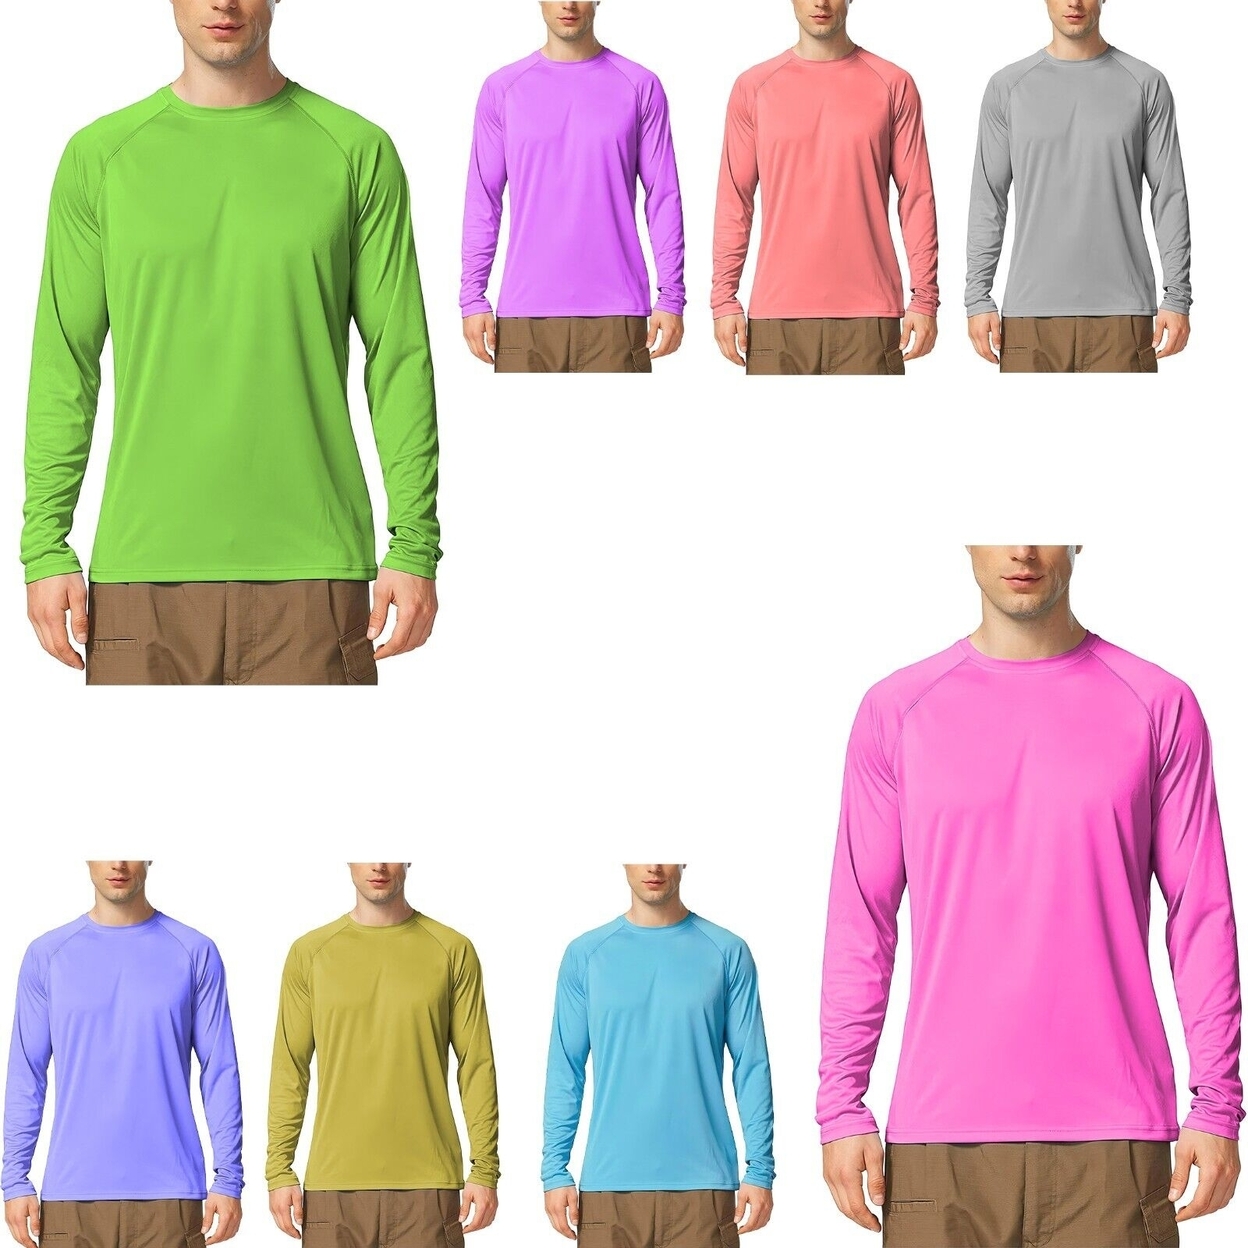 4-Pack: Men's Dri-Fit Moisture Wicking Athletic Cool Performance Slim Fit Long Sleeve T-Shirts - Large